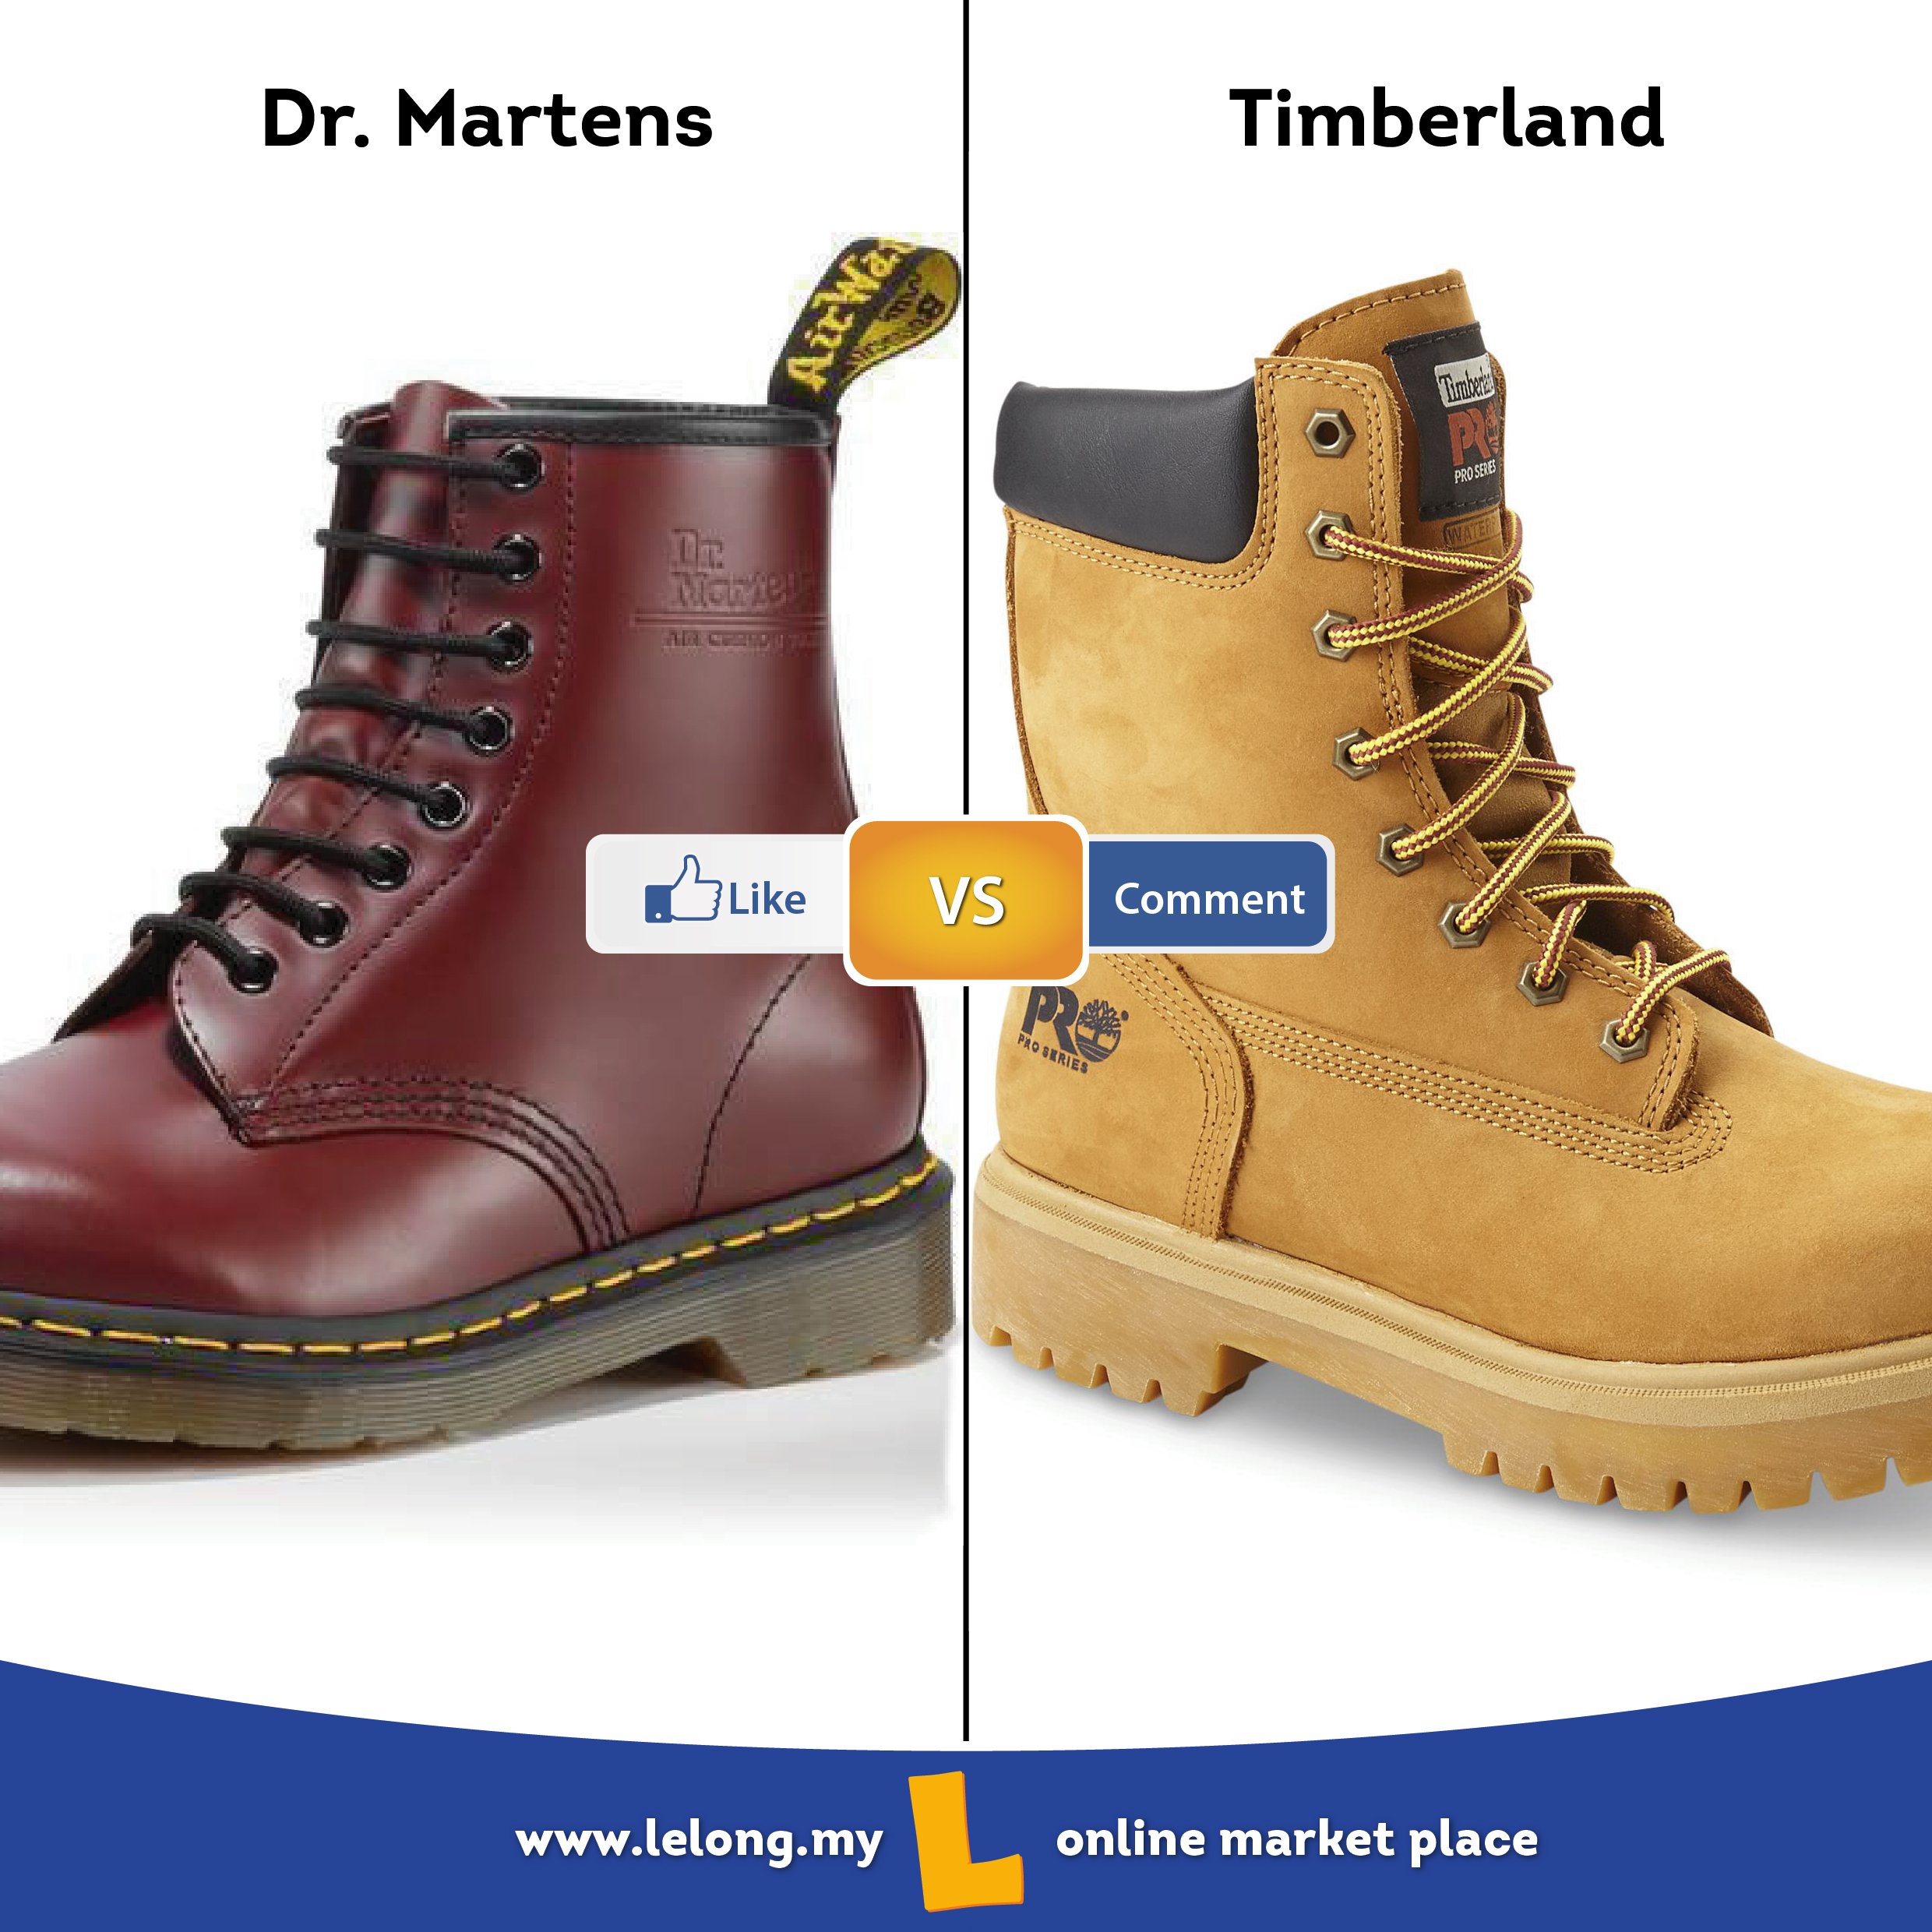 Disciplina tomar el pelo Mediador Lelong.my al Twitter: "Which boot is made for the job ?? Dr. Martens VS  Timberland Check out Dr. Marten shoes here #comparison #dtmar …  https://t.co/KJsny50fzg https://t.co/55lnRe9Els" / Twitter